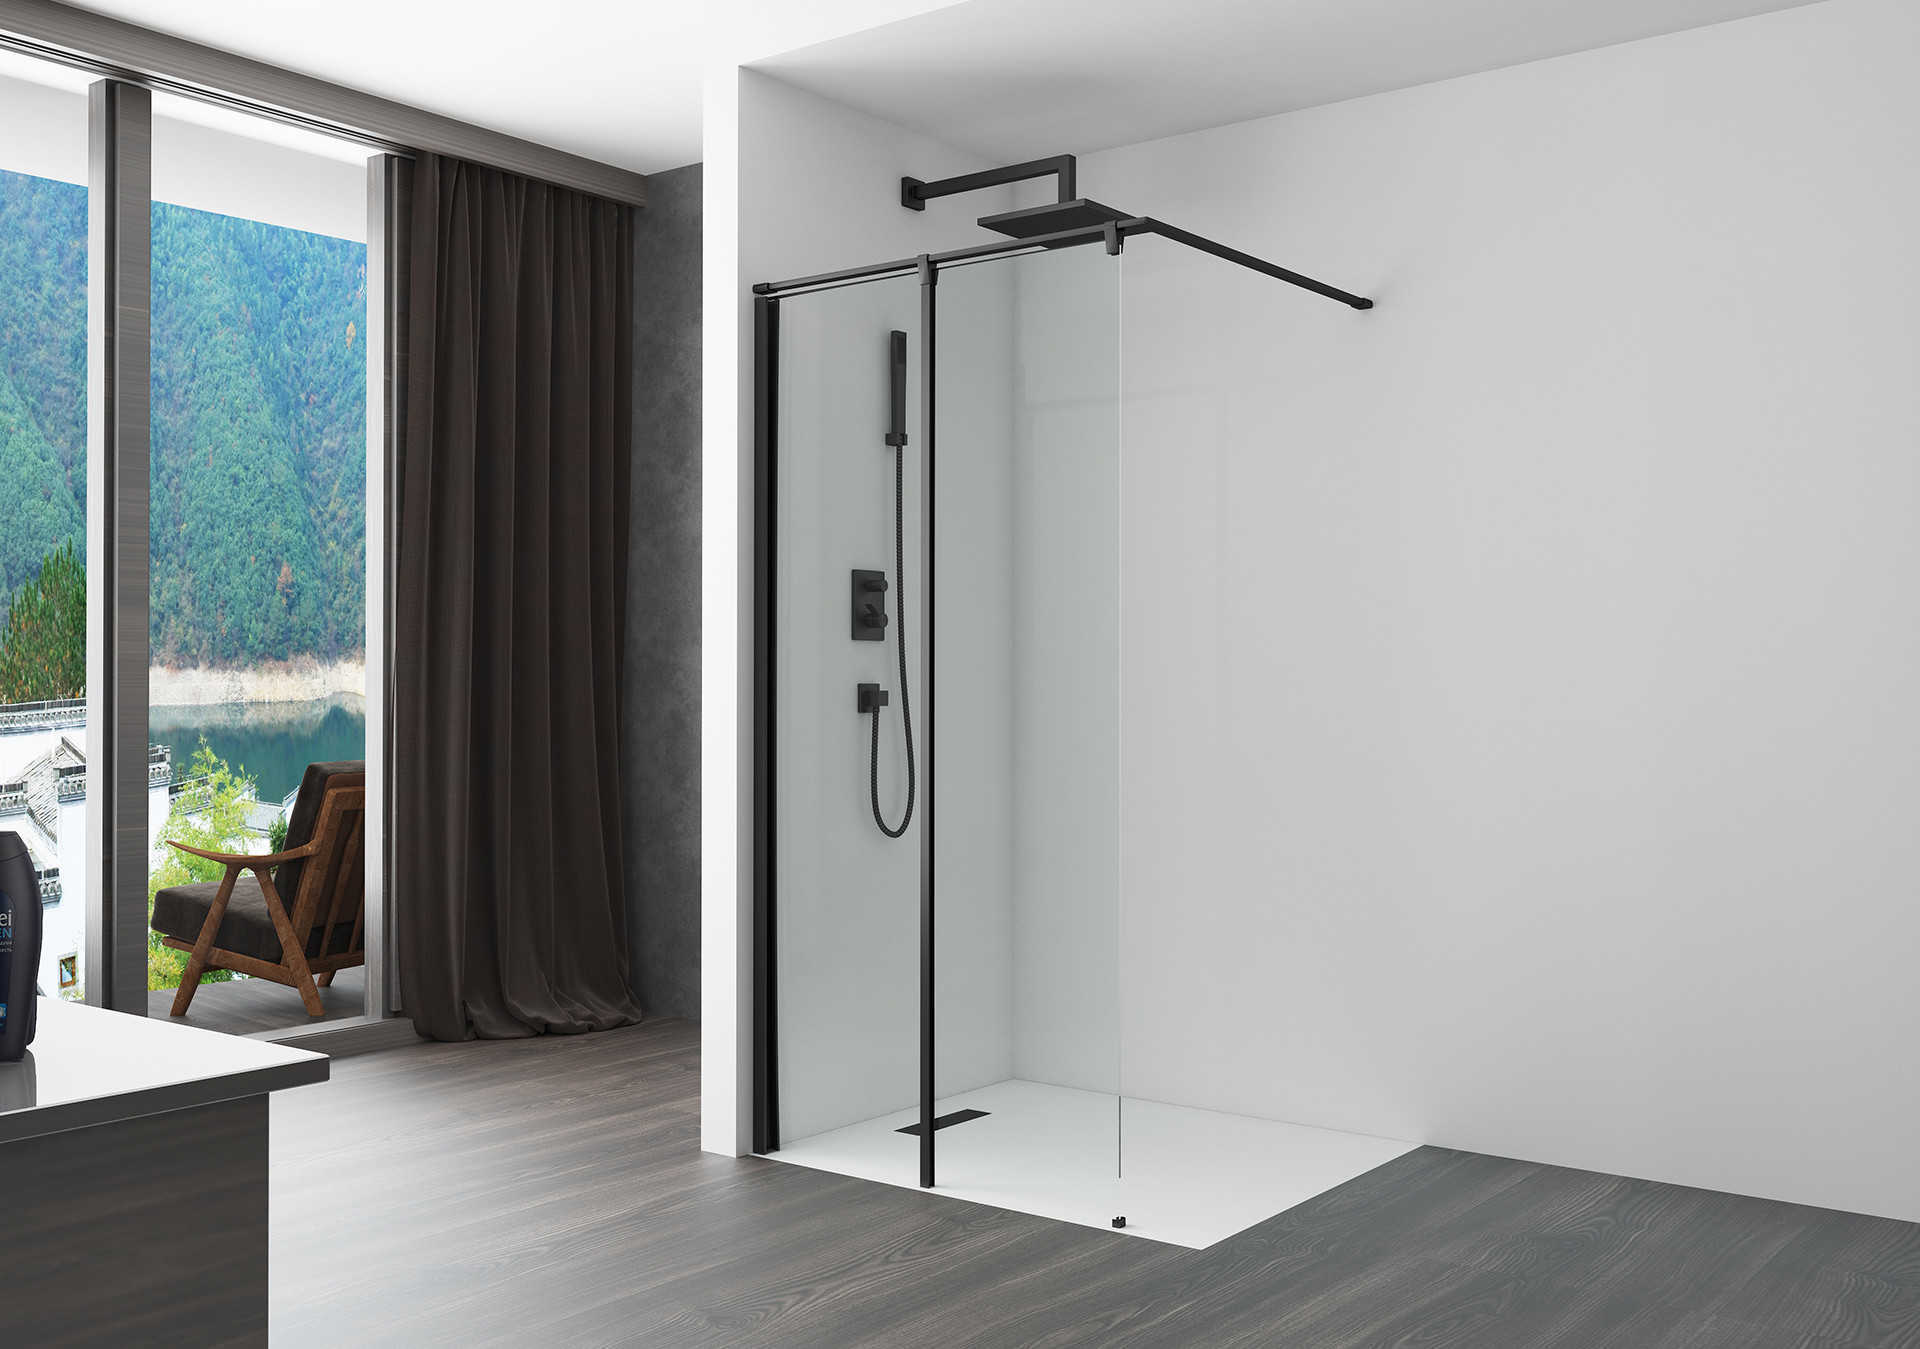 Walk In Shower Enclosure Tips - How To Get The Right Shower Enclosure For Your Bathroom